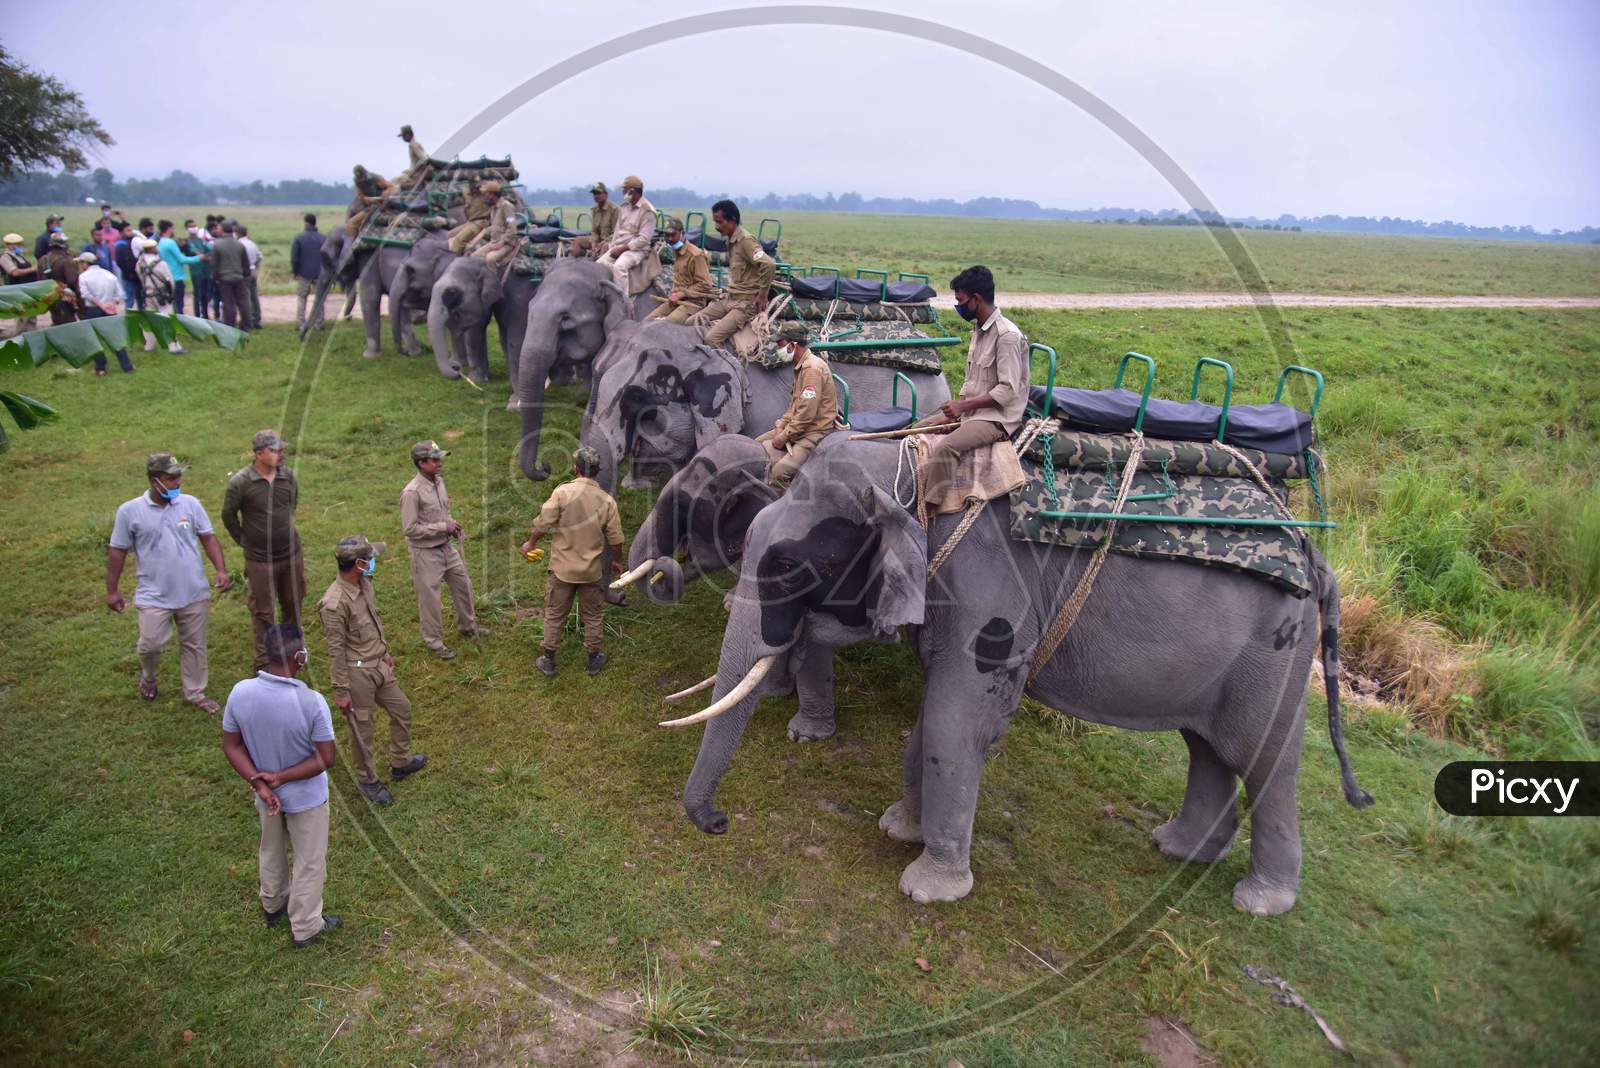 Elephants are lined up for tourists to ride after seven-month-long closure since March because of coronavirus lockdown  at the Kaziranga national park  in Golaghat District of Assam on Nov 1,2020